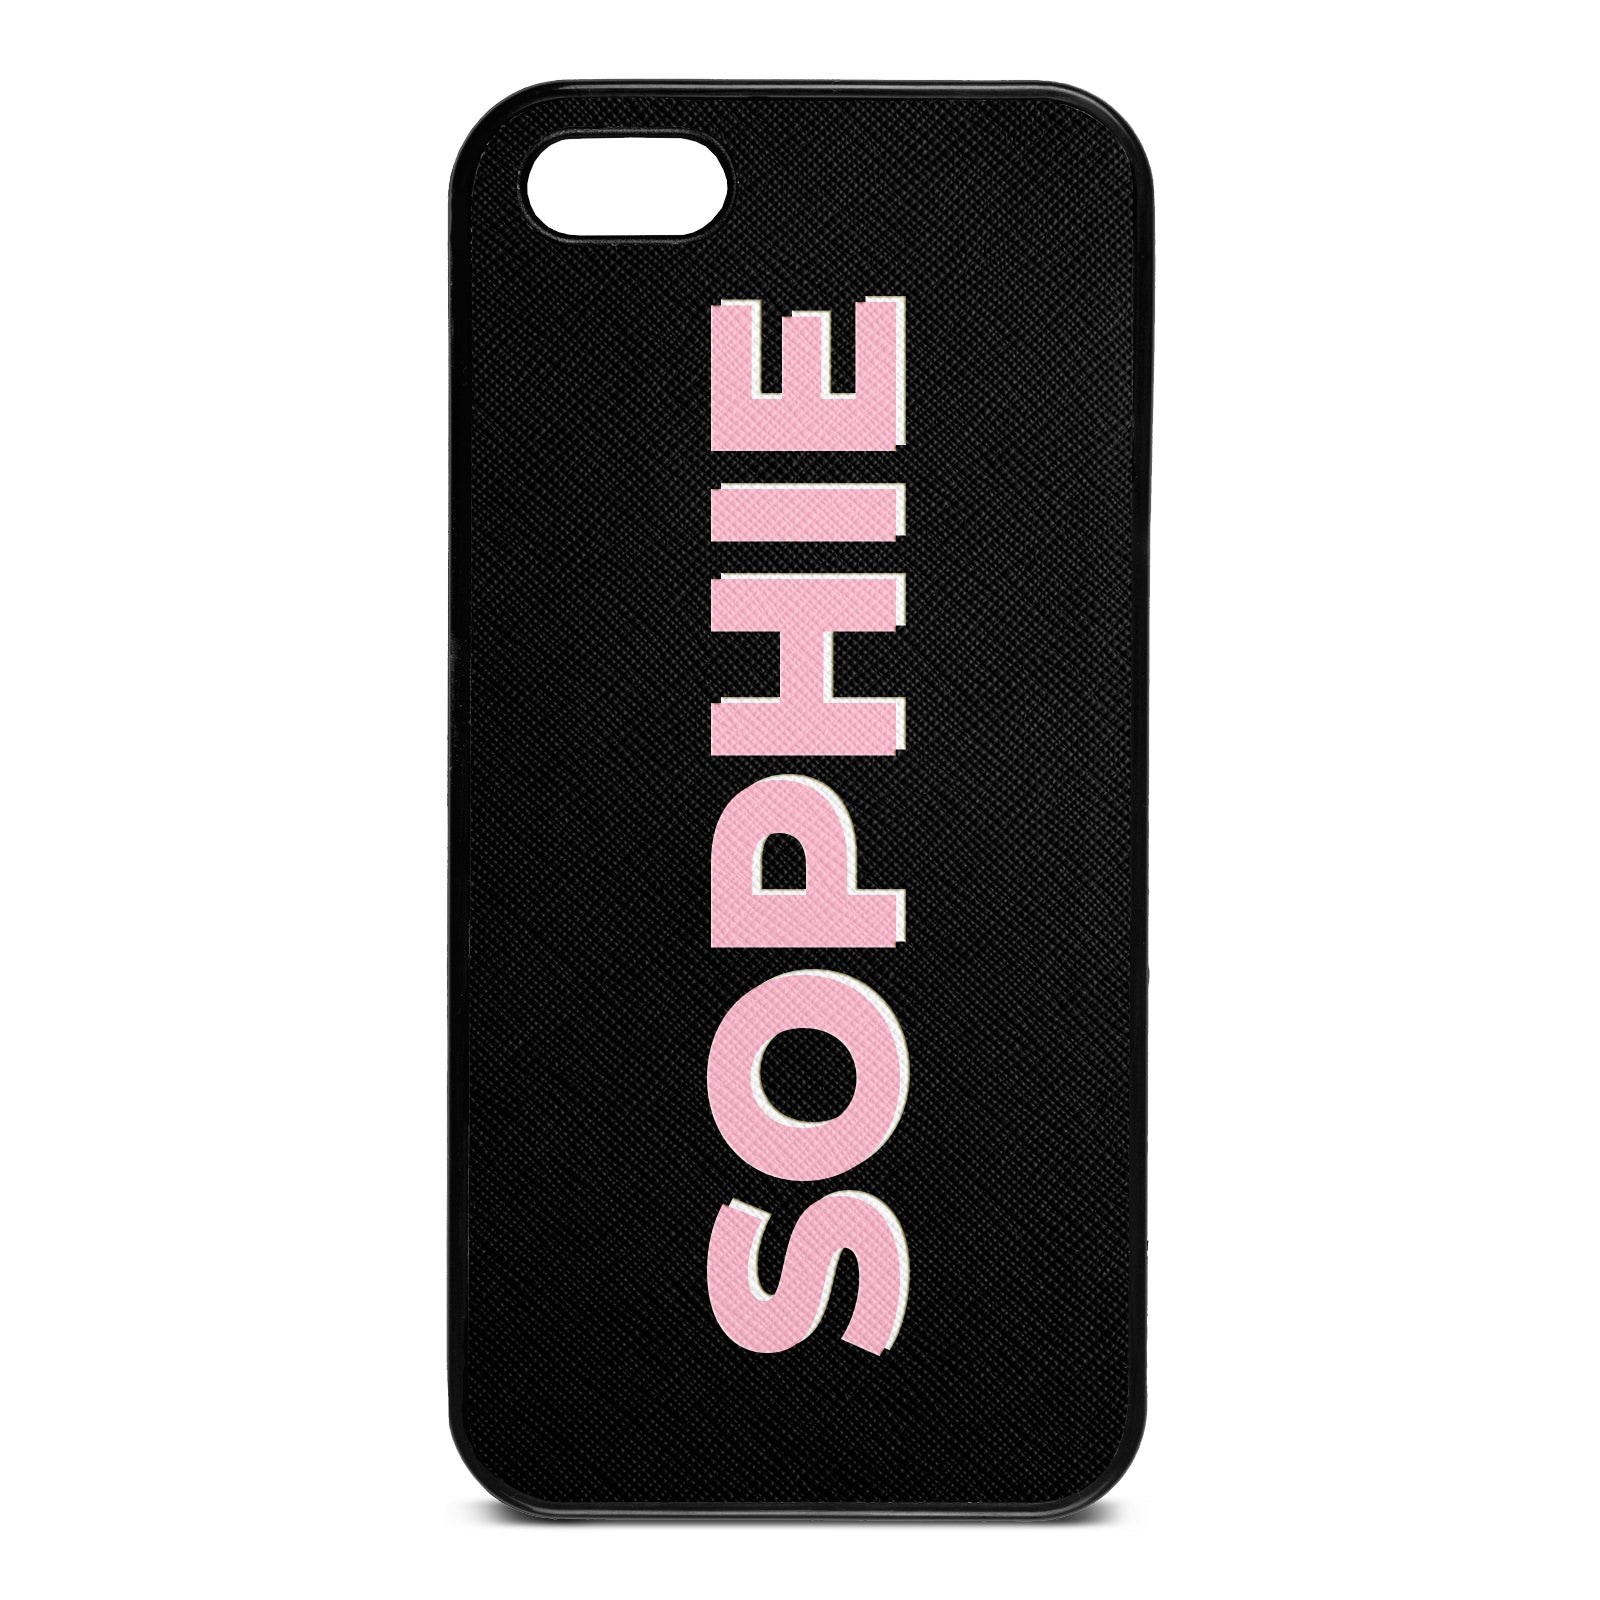 iPhone 5 Drop Shadow Black Leather Case